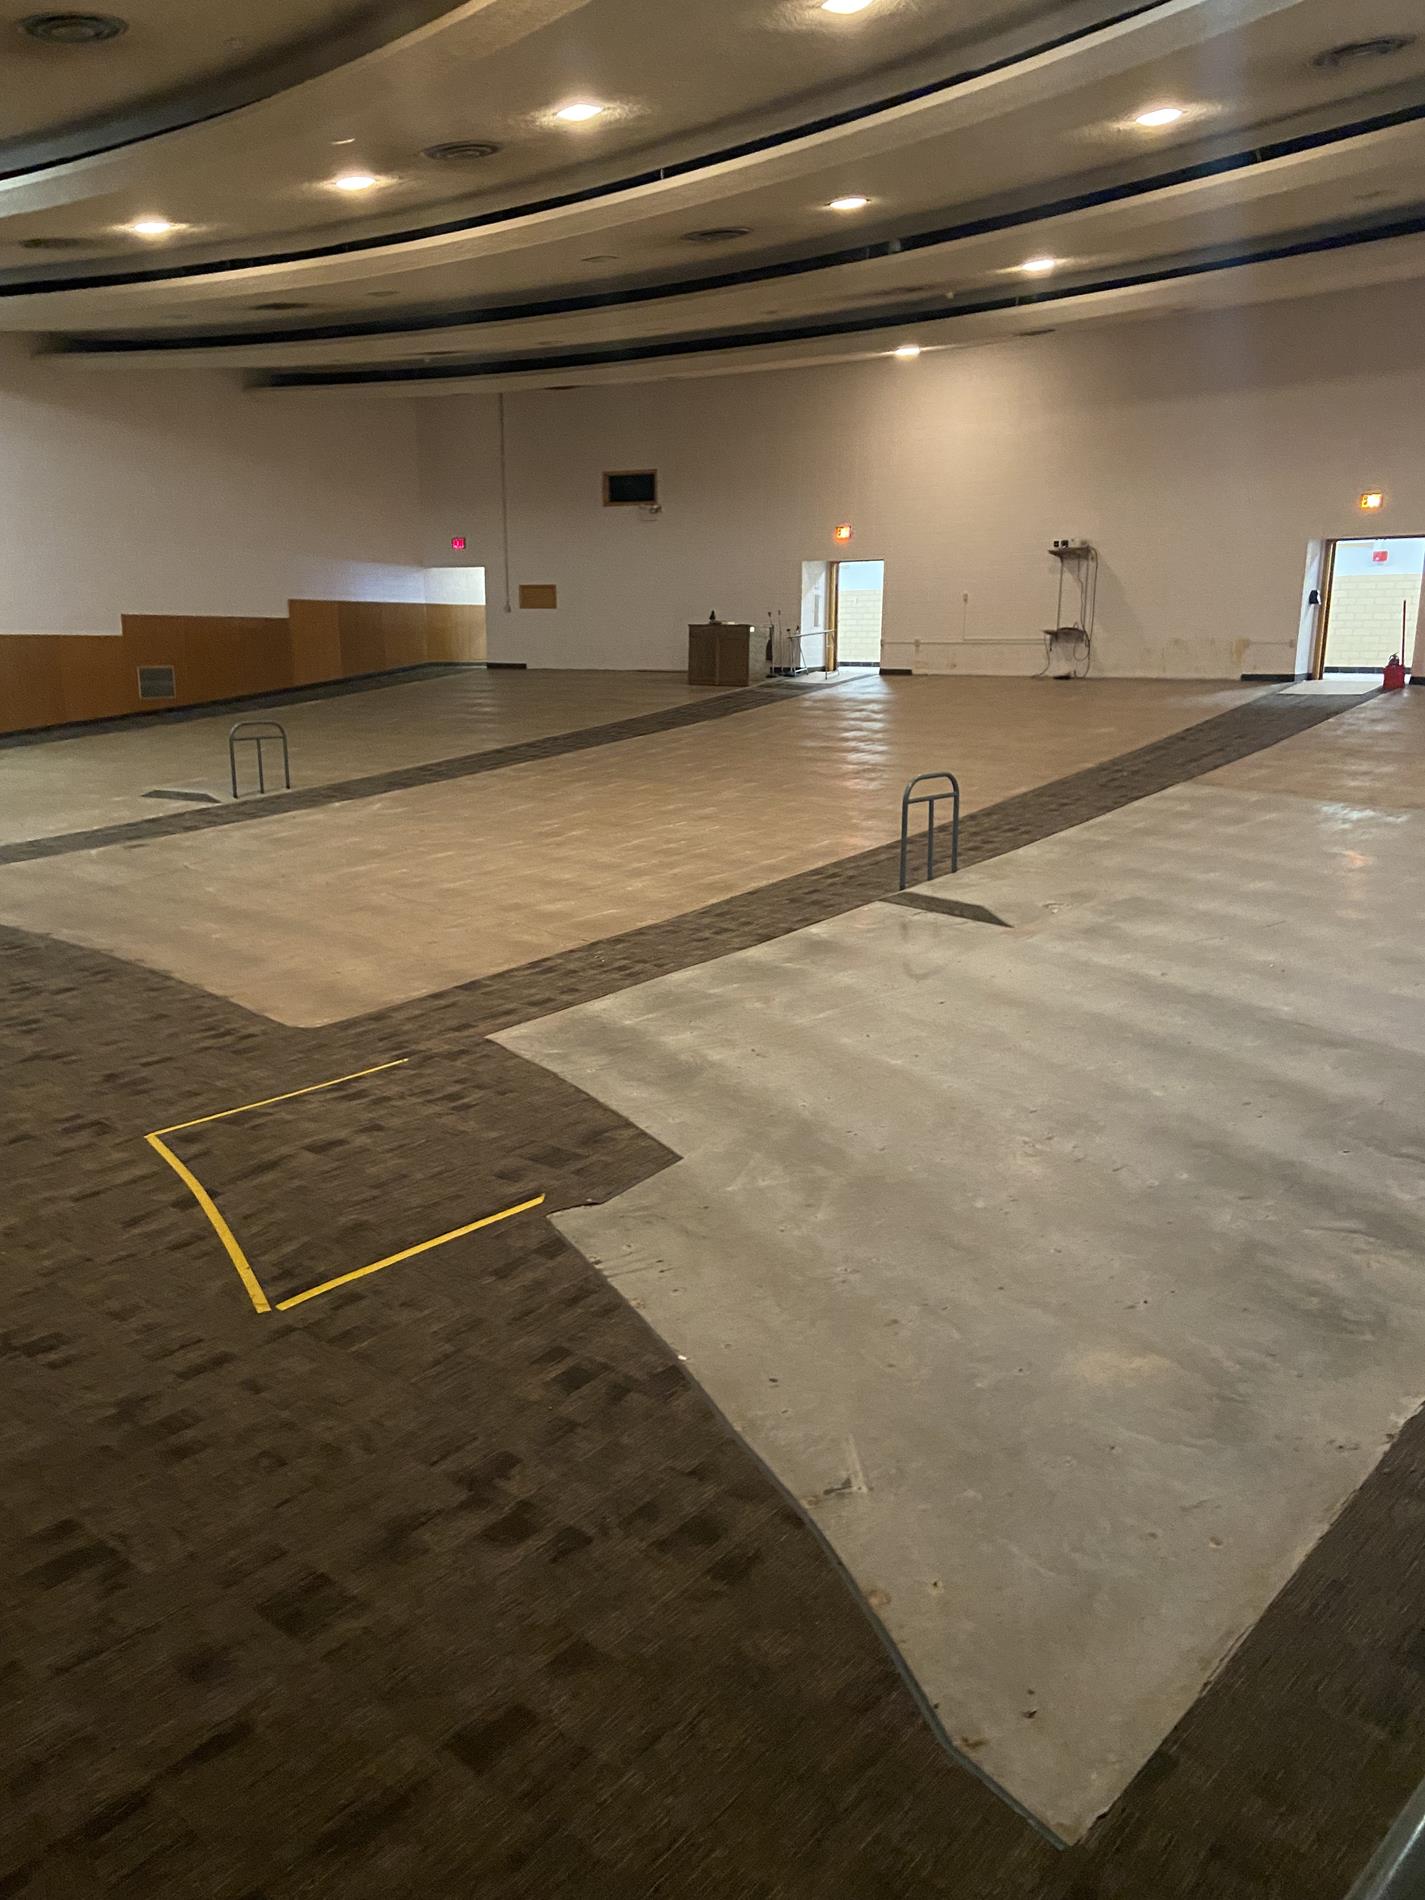 Auditorium - chairs removed!